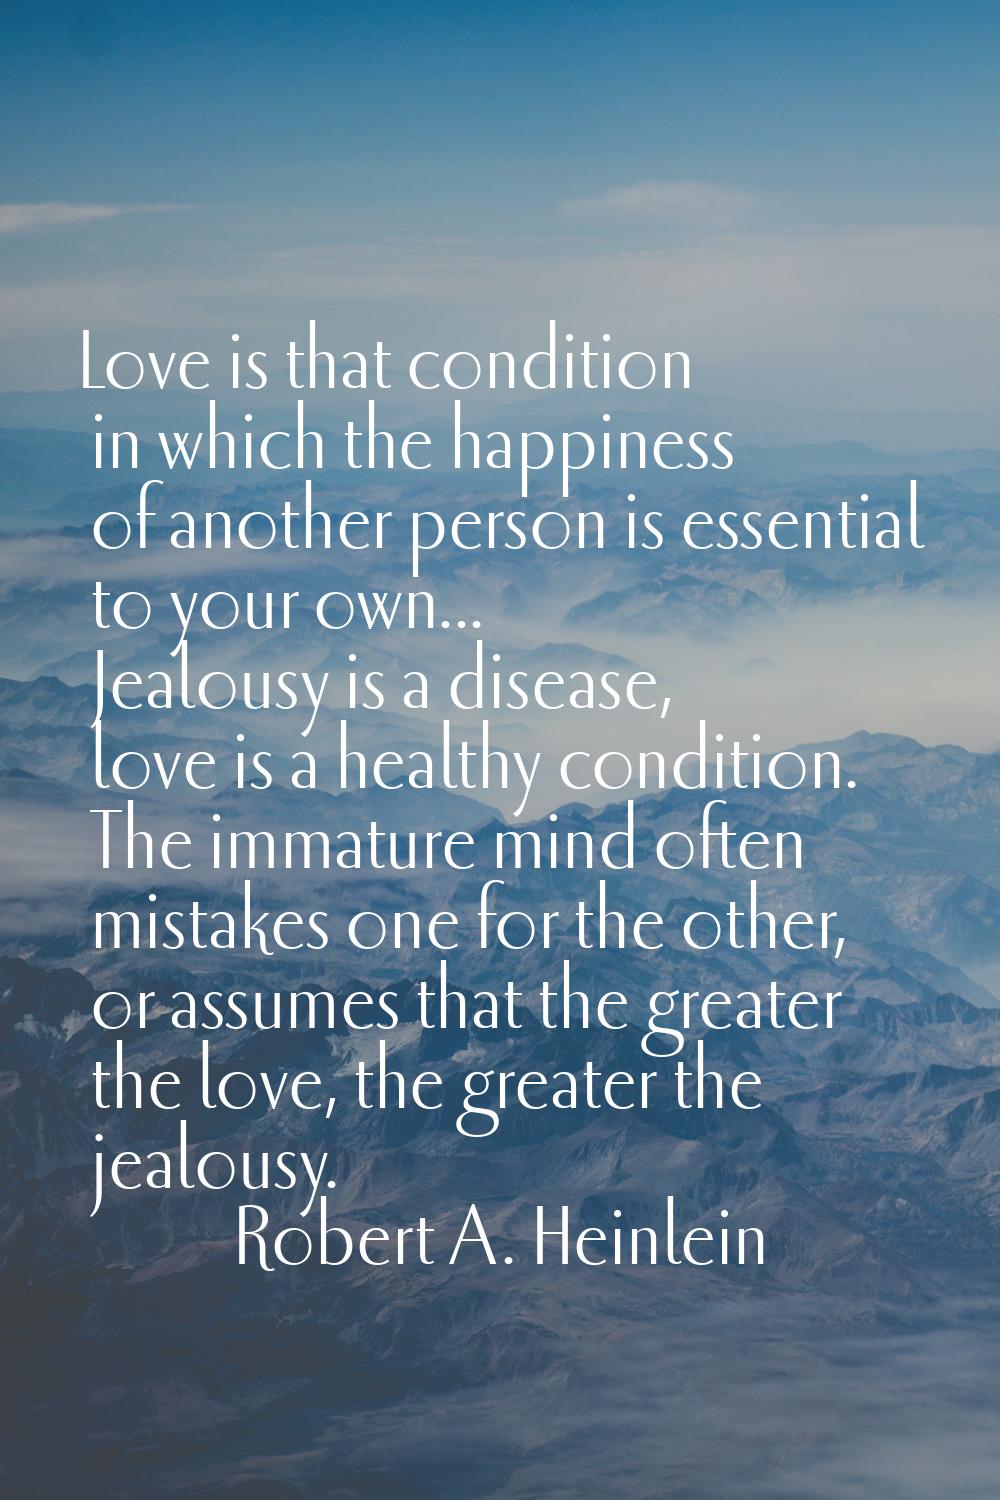 Love is that condition in which the happiness of another person is essential to your own... Jealous